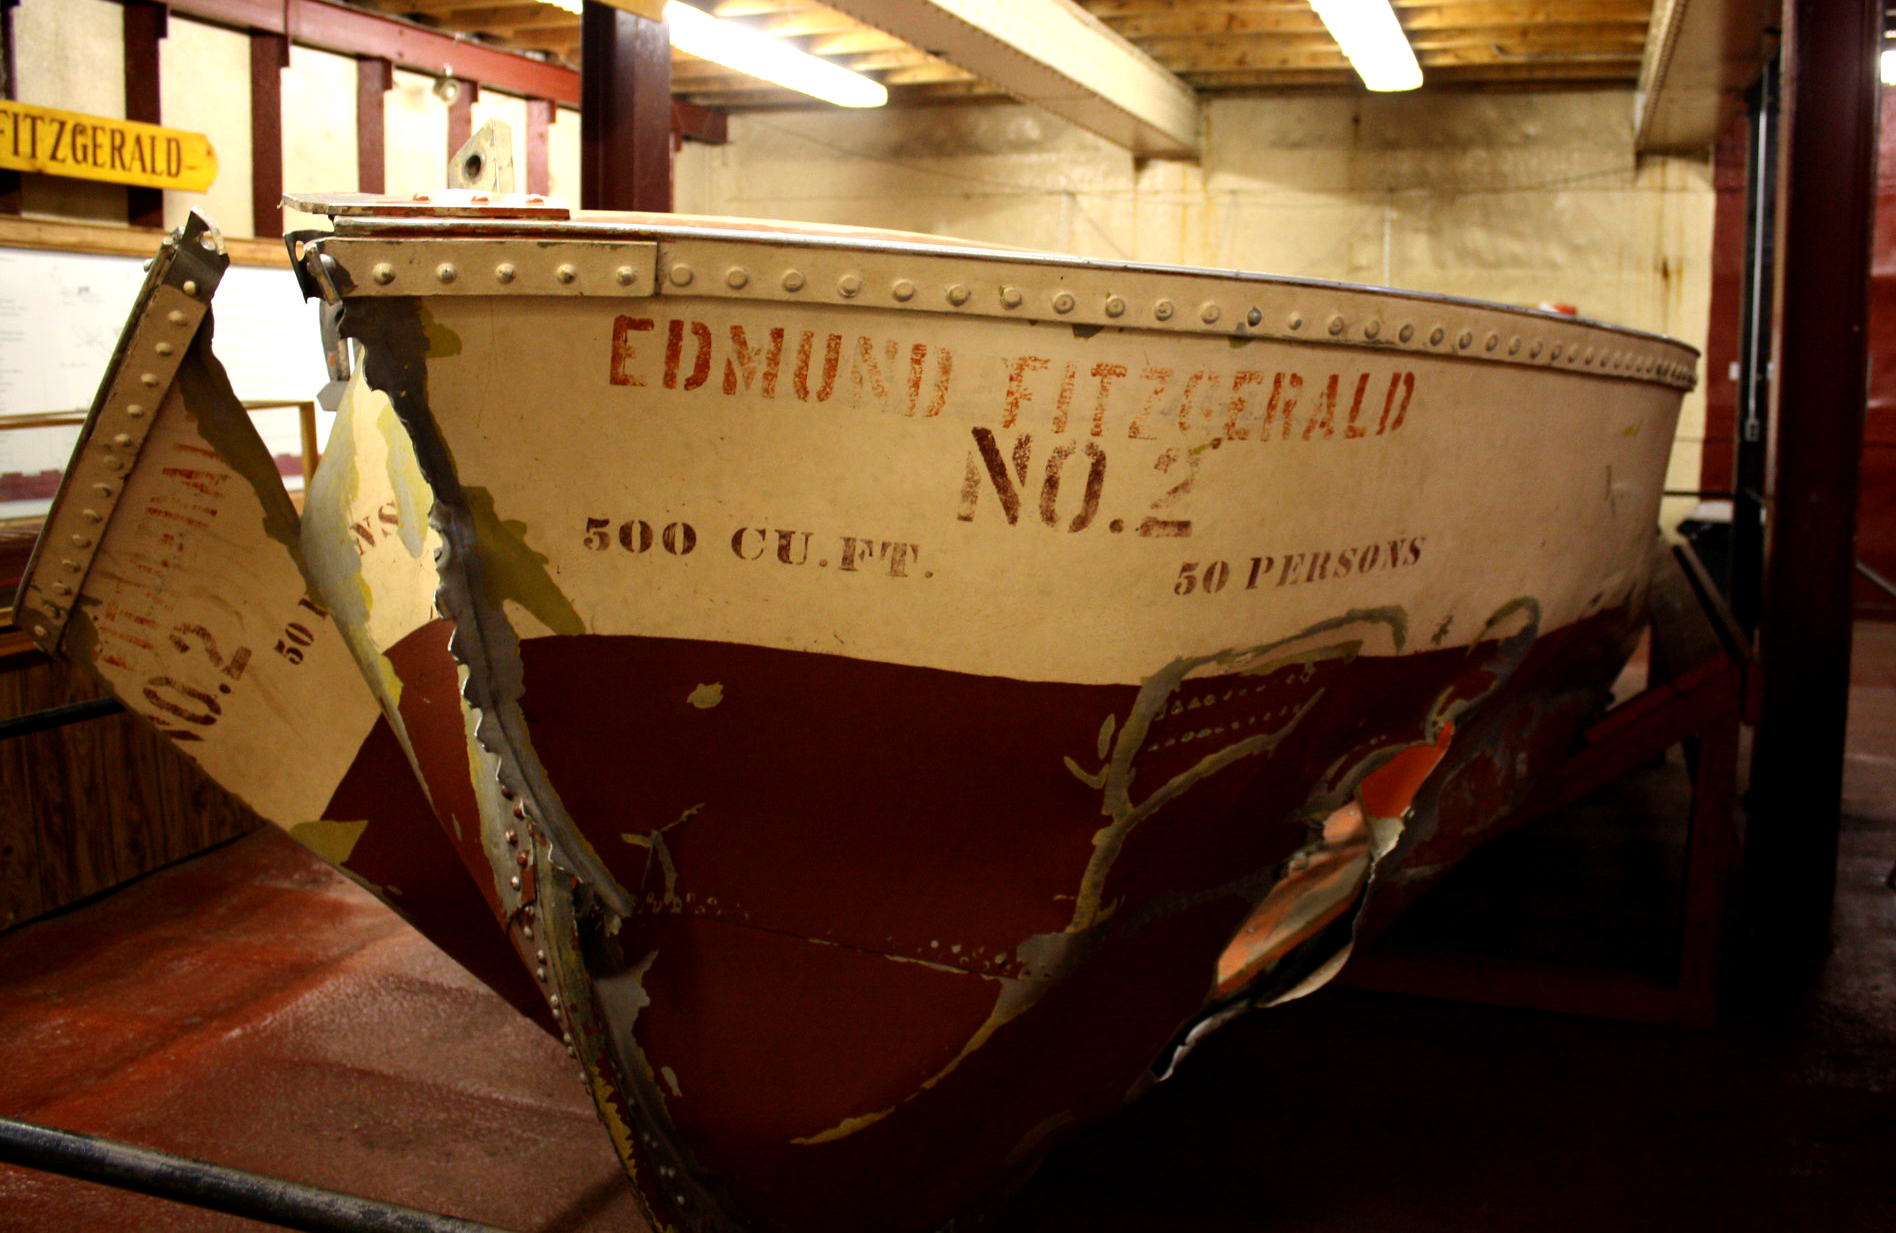 The lifeboat from the Edmund Fitzgerald.